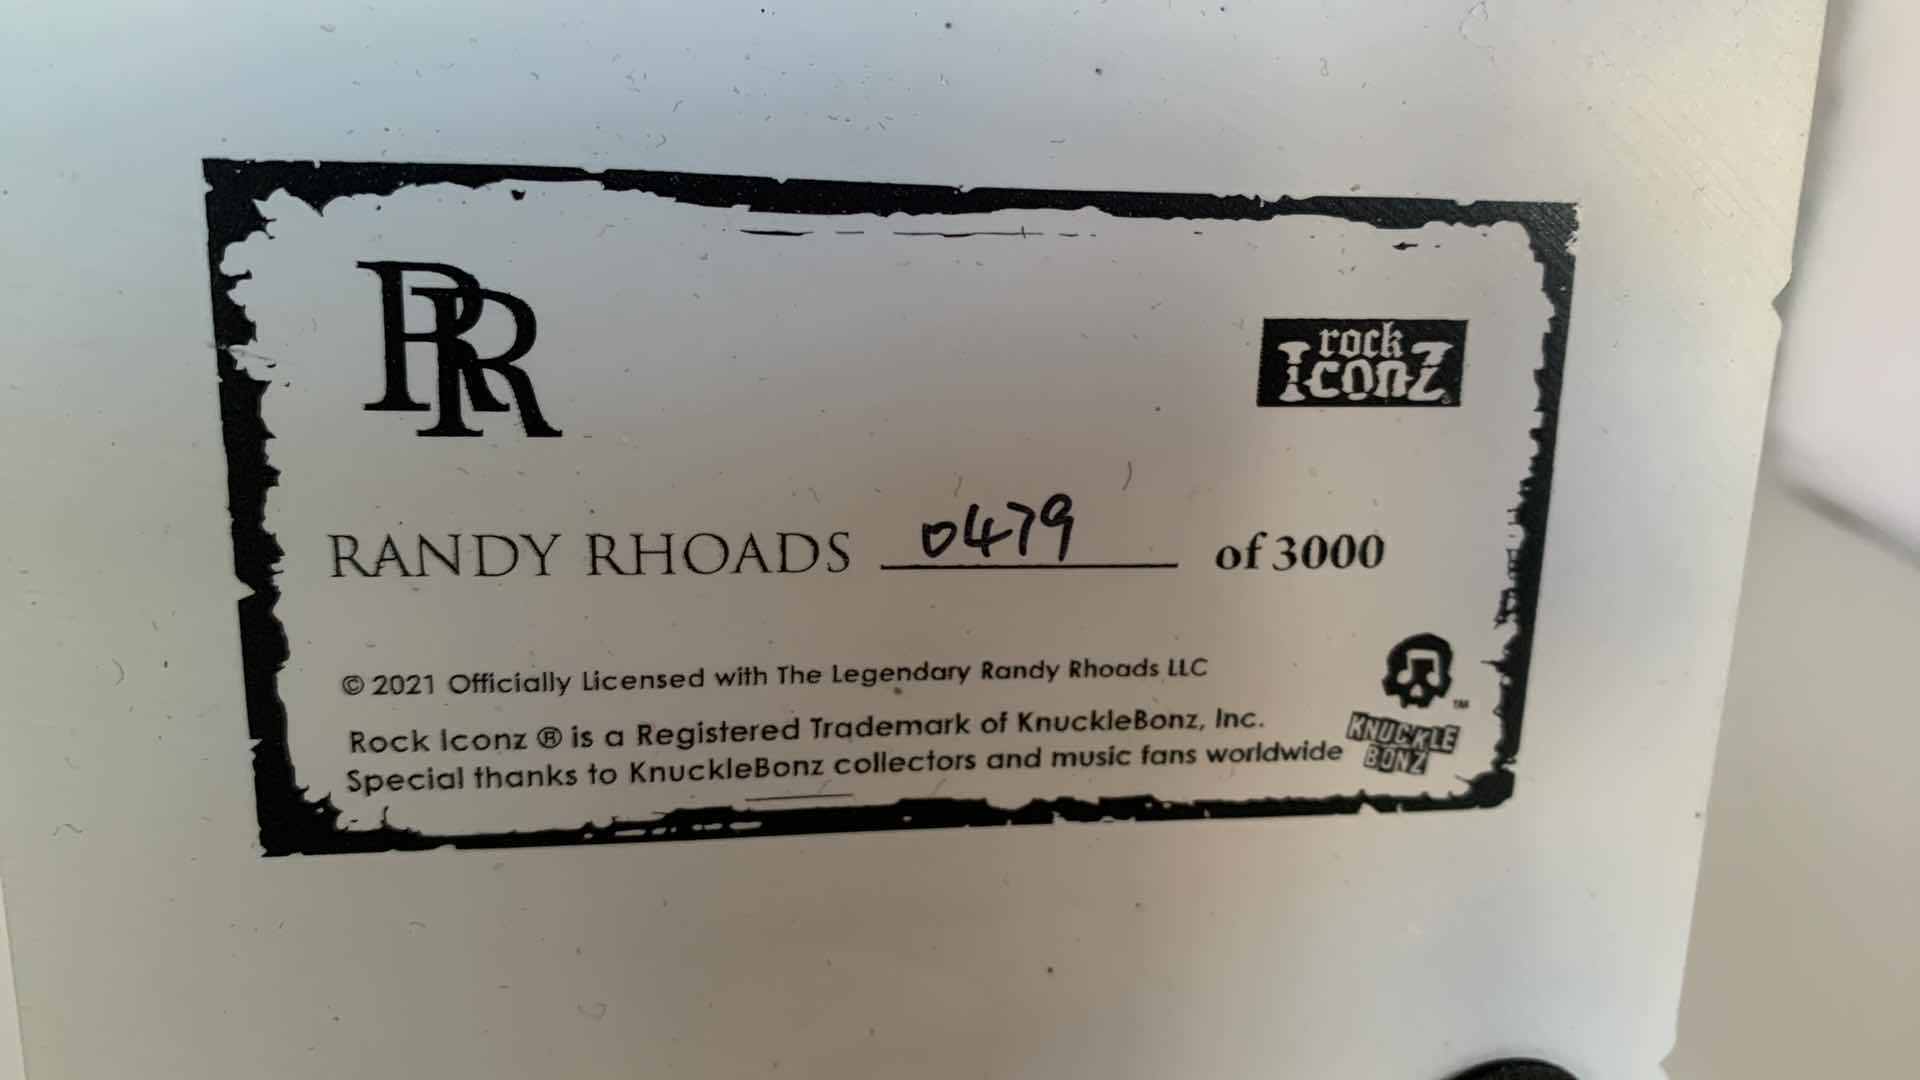 Photo 4 of 2021 ROCK ICONZ RANDY RHODES ACTION FIGURE.